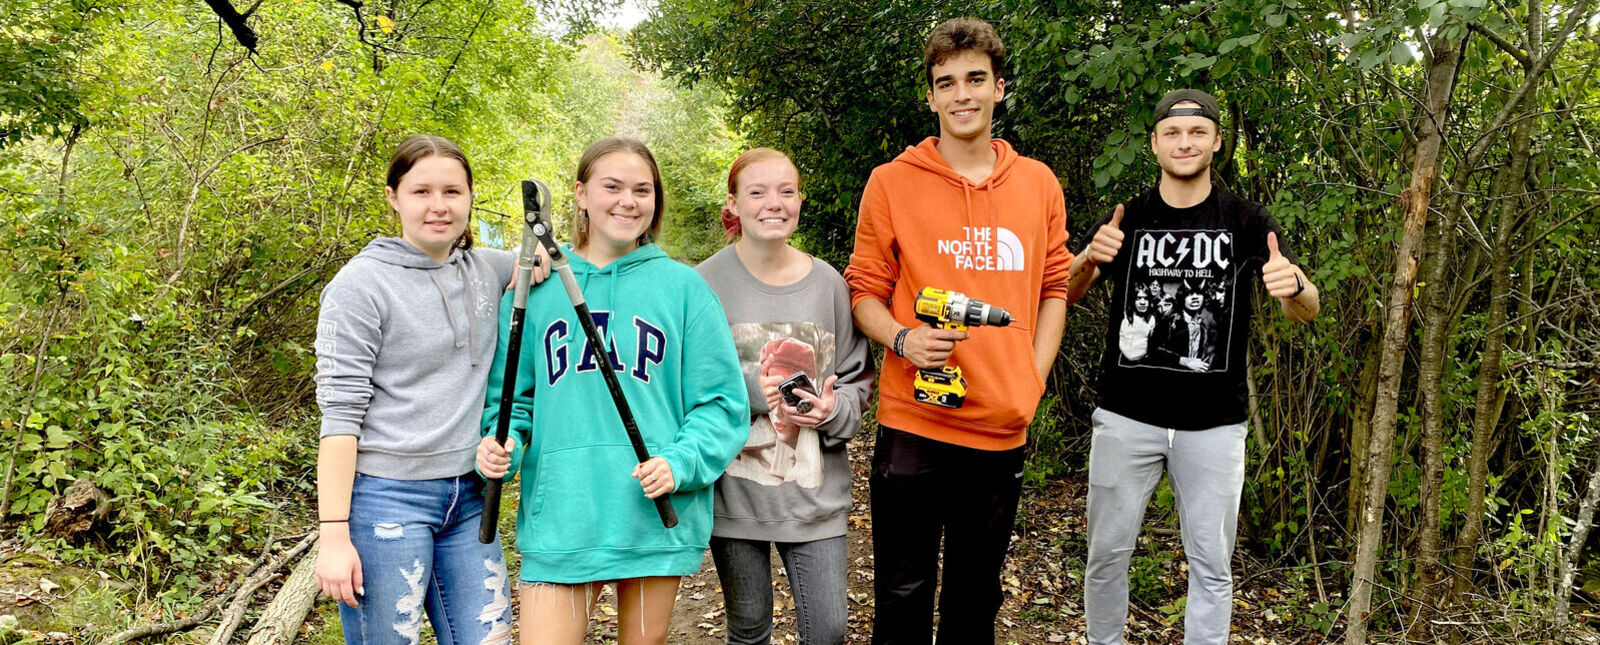 A group of Environmental Science students stand together while holding tools in a wooded area.